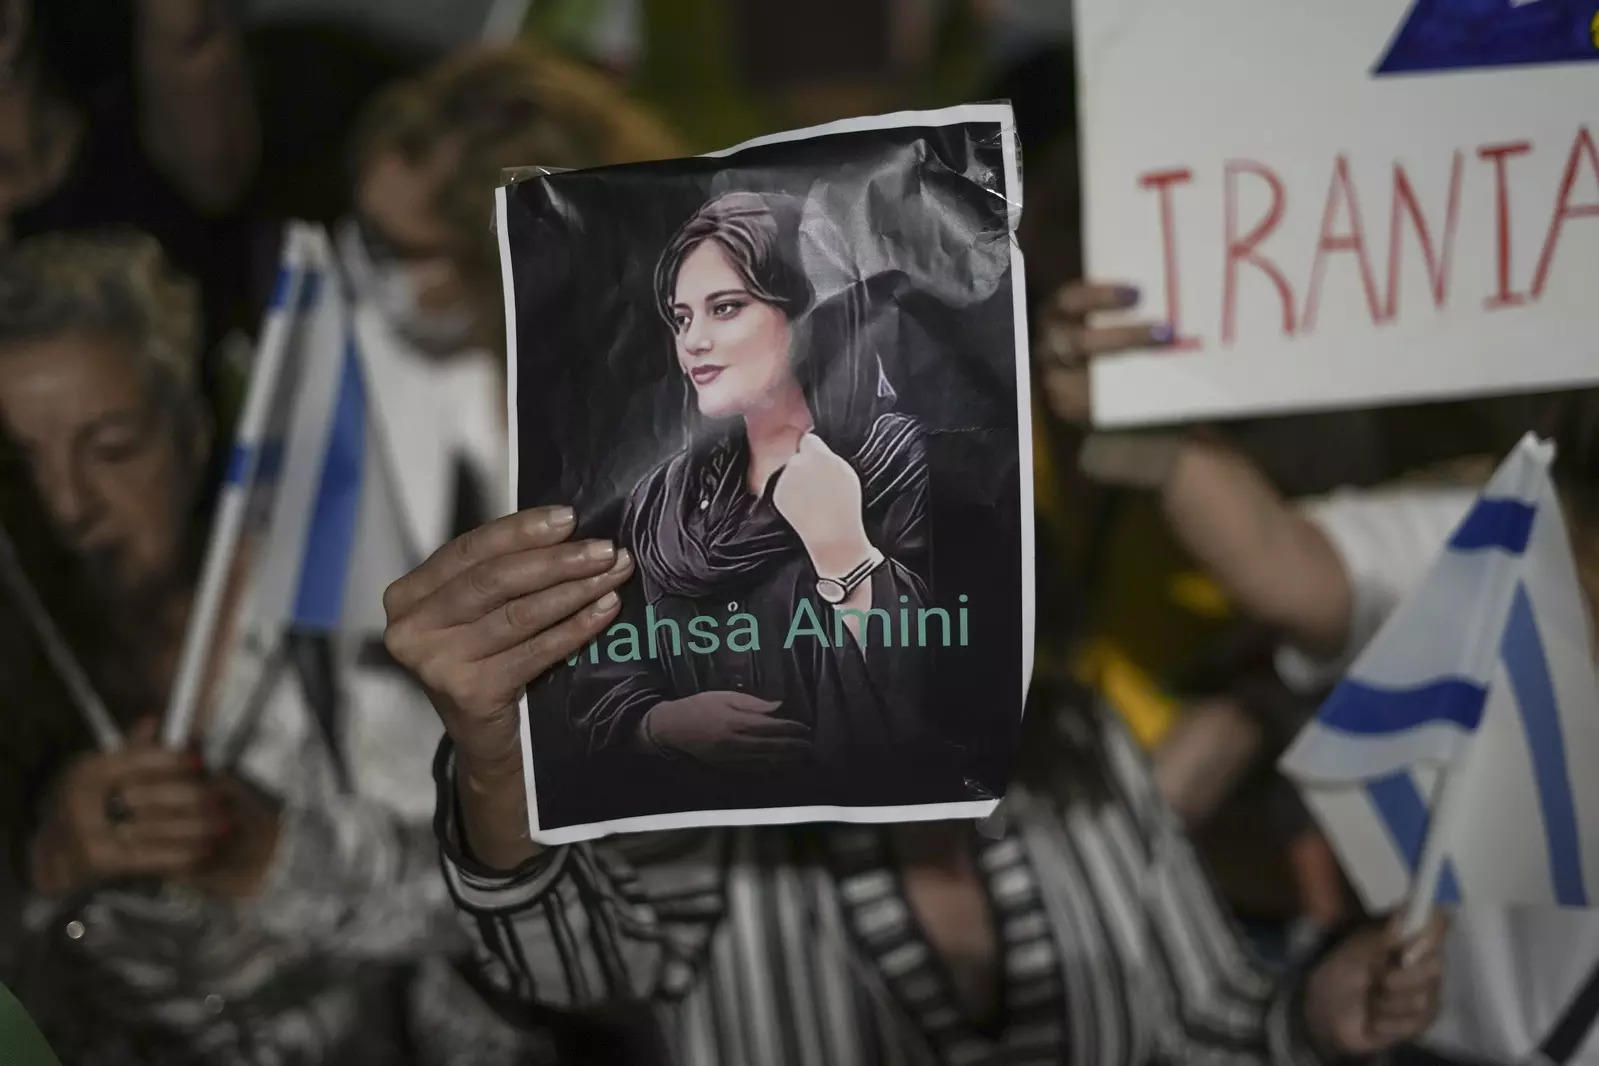 Women take part in a protest against Masa Amini's death during a rally in Tel Aviv.